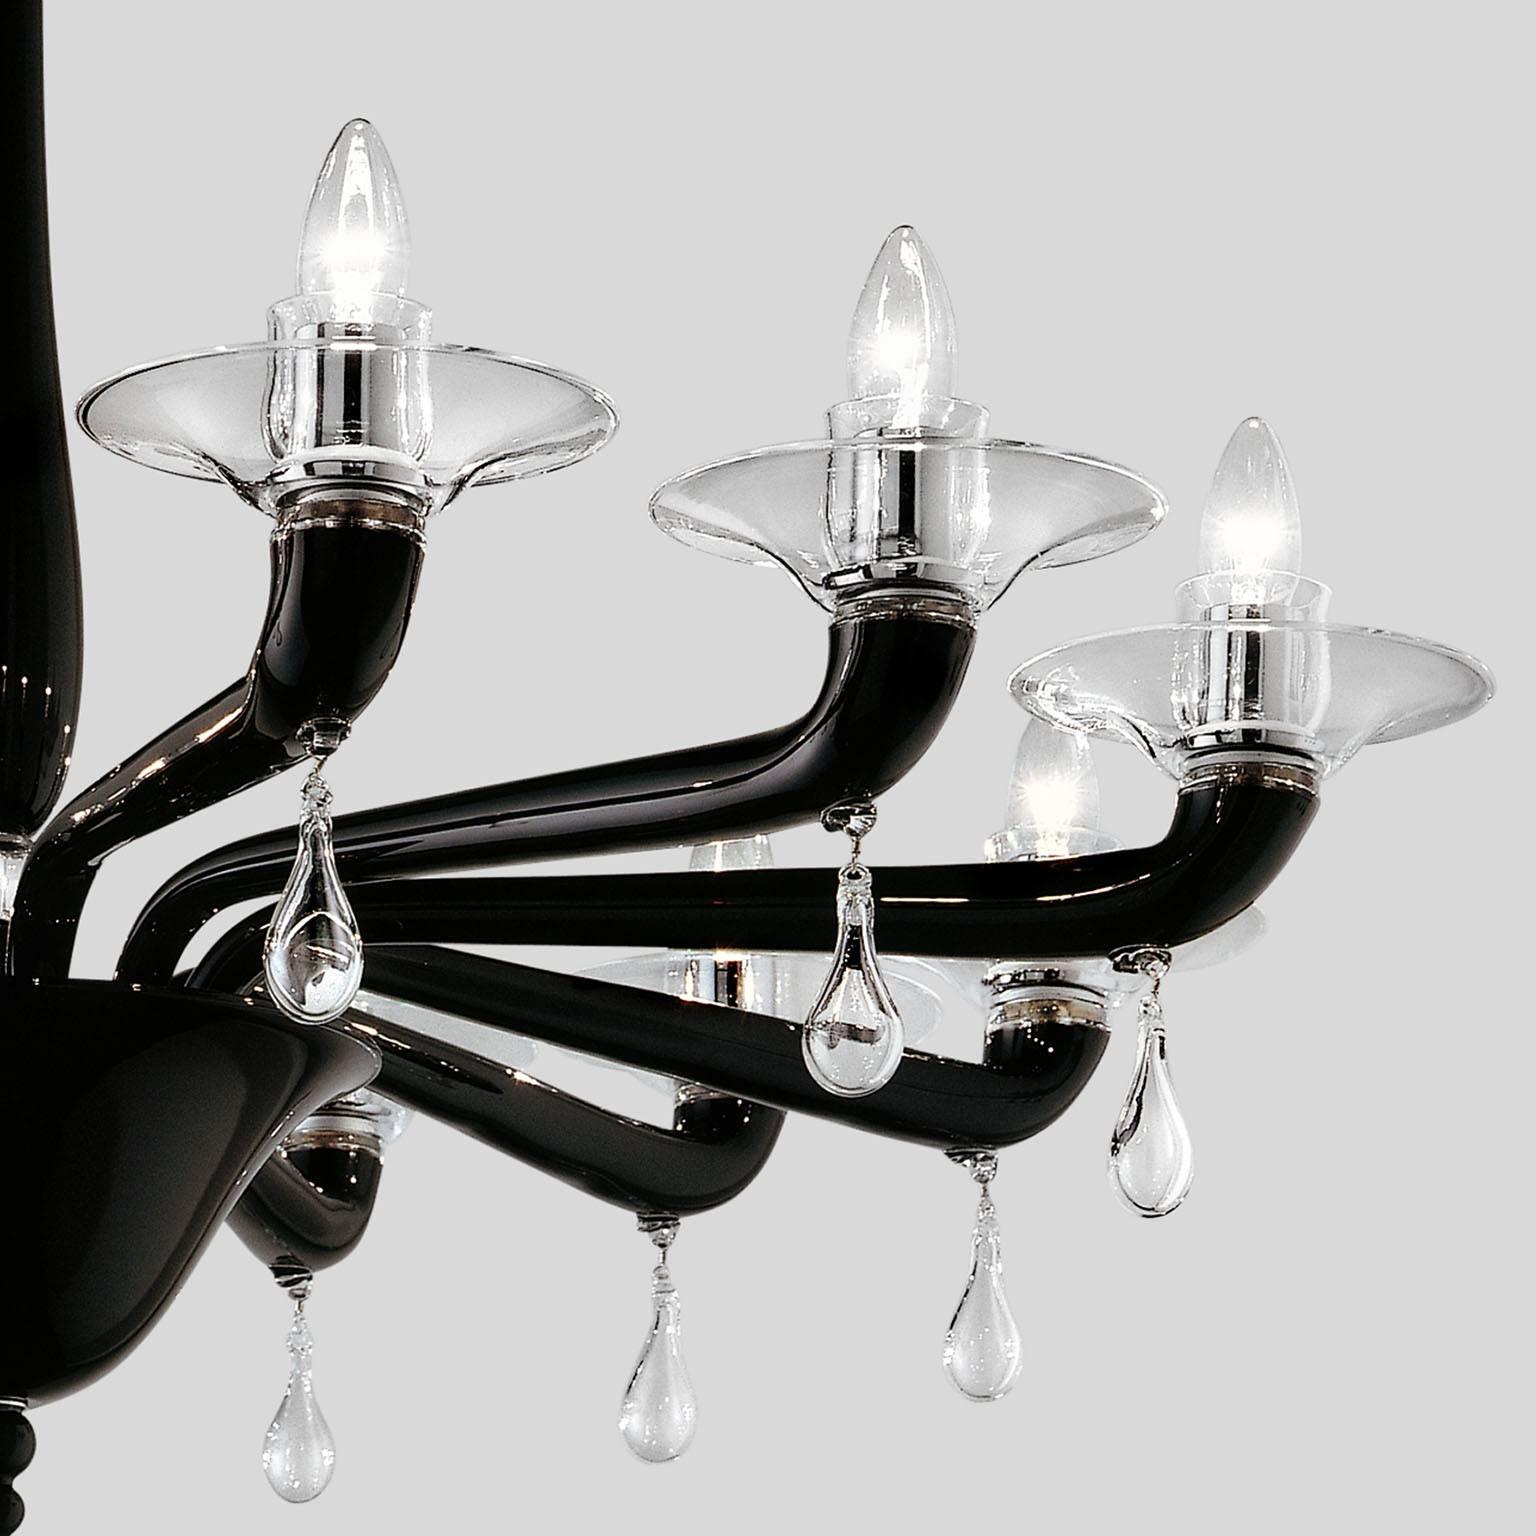 Twelve-light Venini Classic chandelier in handmade blown glass.
Re-edition of an historical chandelier designed in 1924.
Lighting source: 12 x max 60W E14
Color: black with crystal decorations
Metal: chromium-plated with chain
Weight: around 20